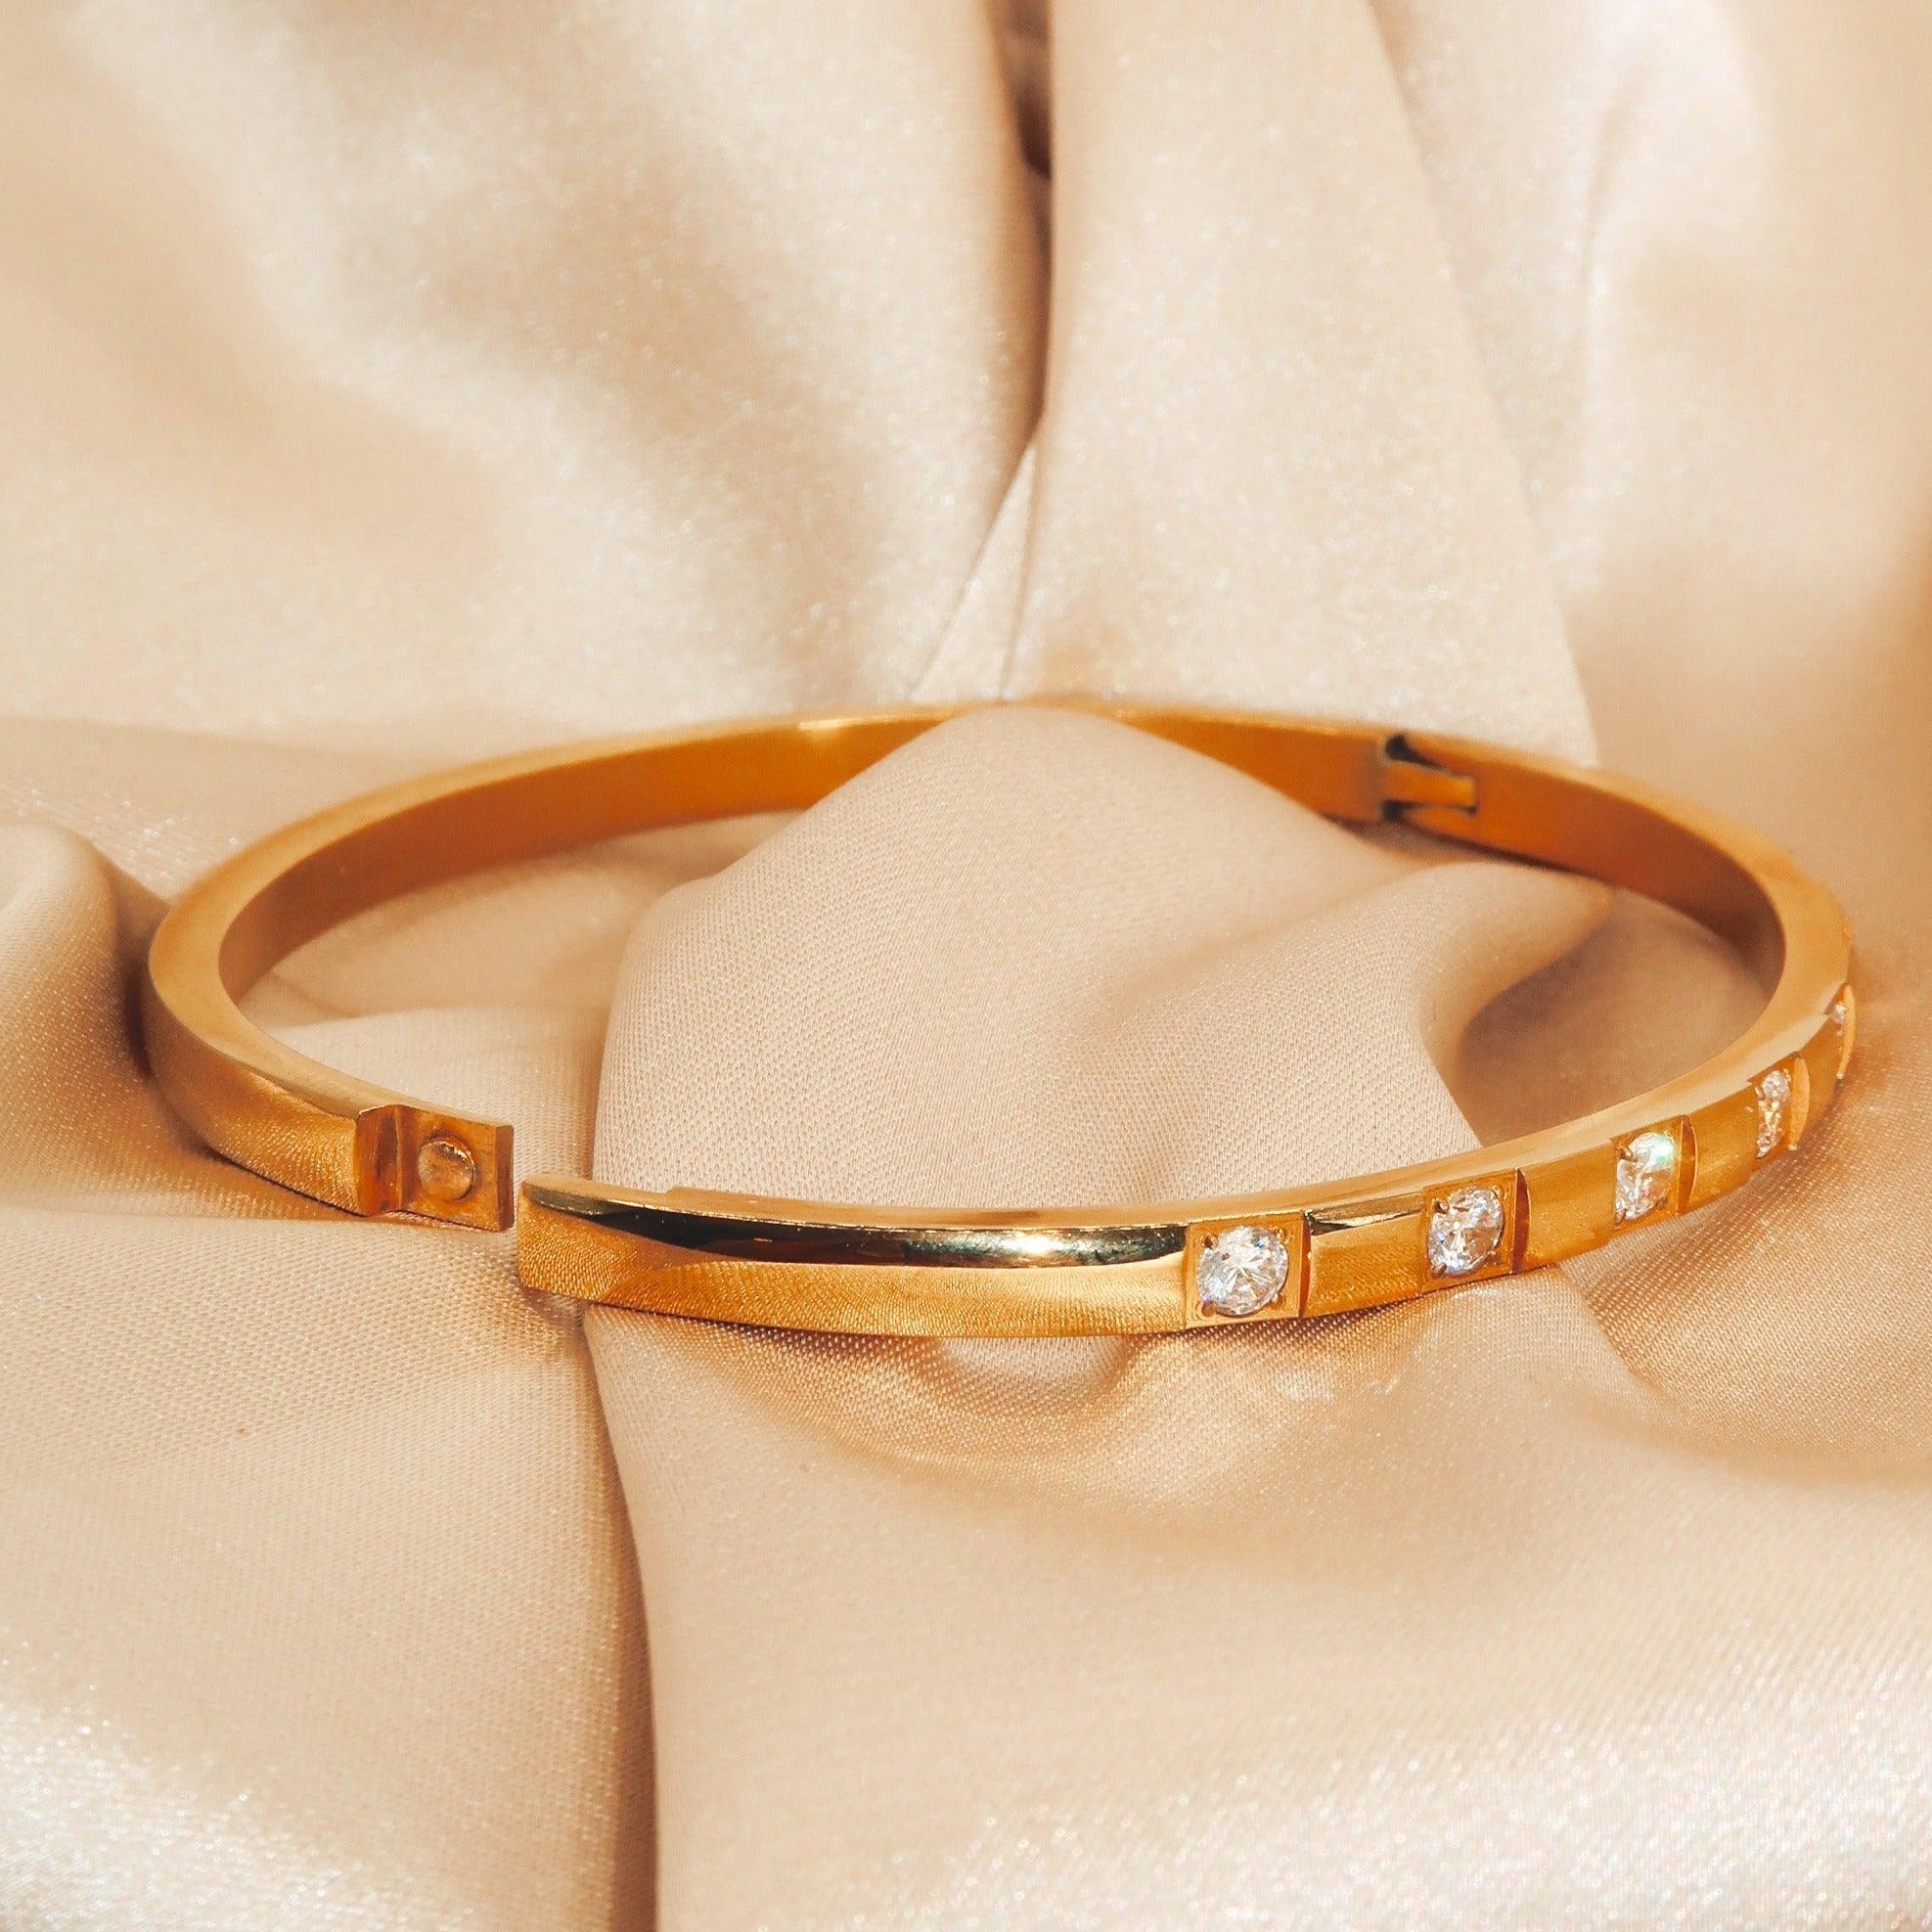 CAMI - 18K PVD Gold Plated Stackable Bracelet with CZ Stones - Mixed Metals